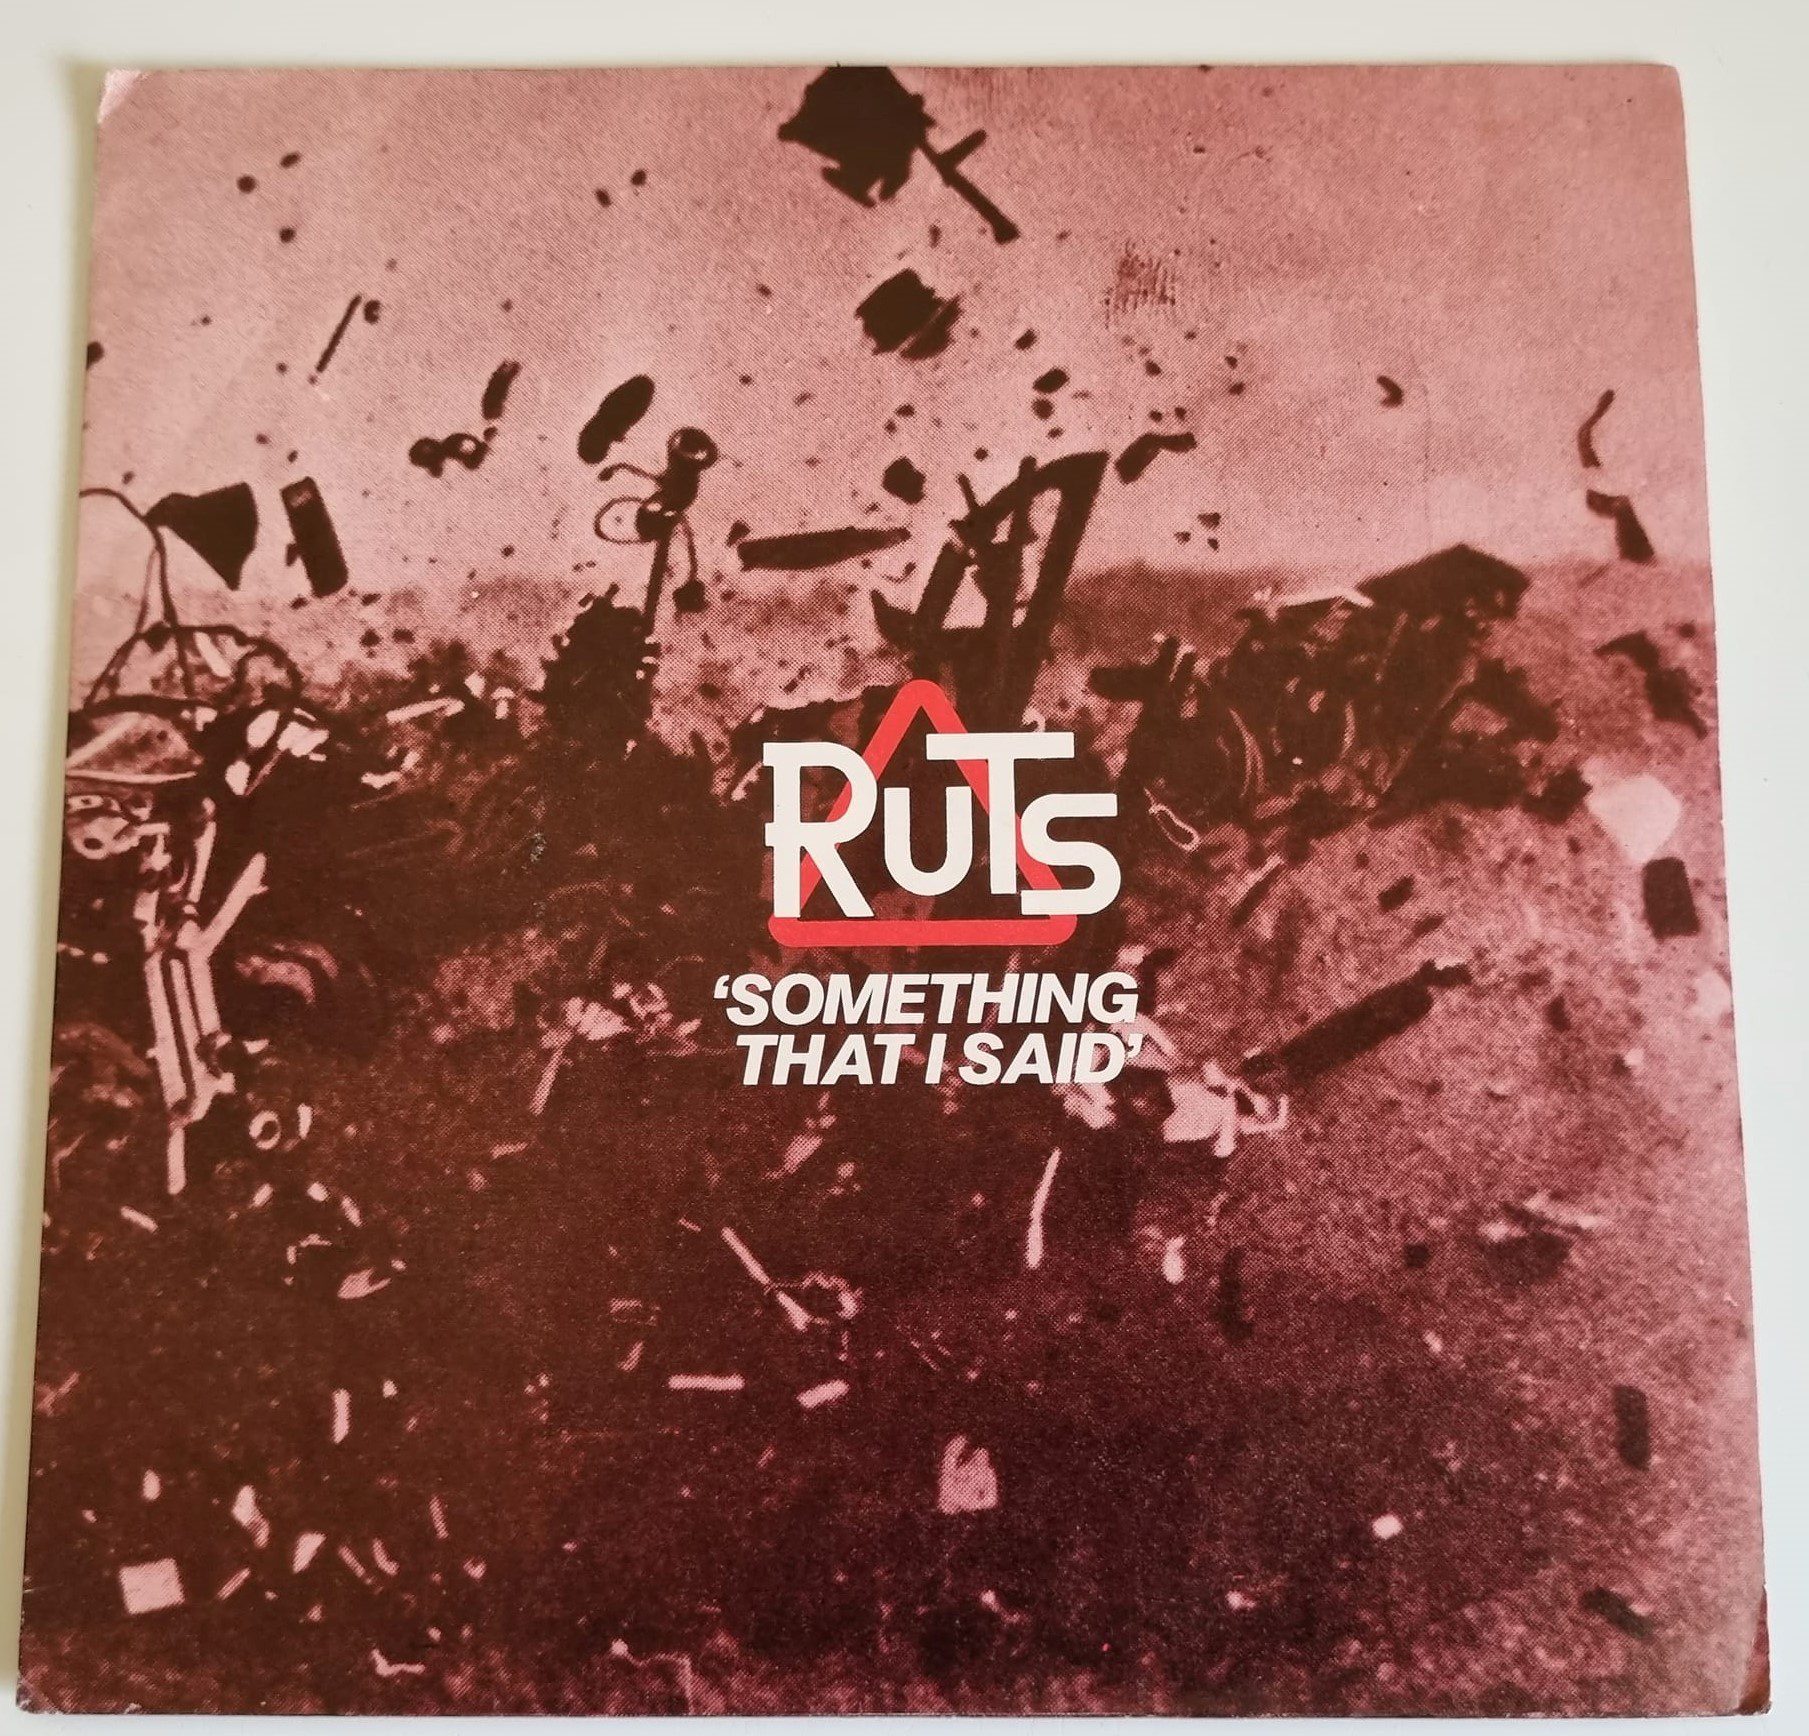 Buy this rare Ruts record by clicking here